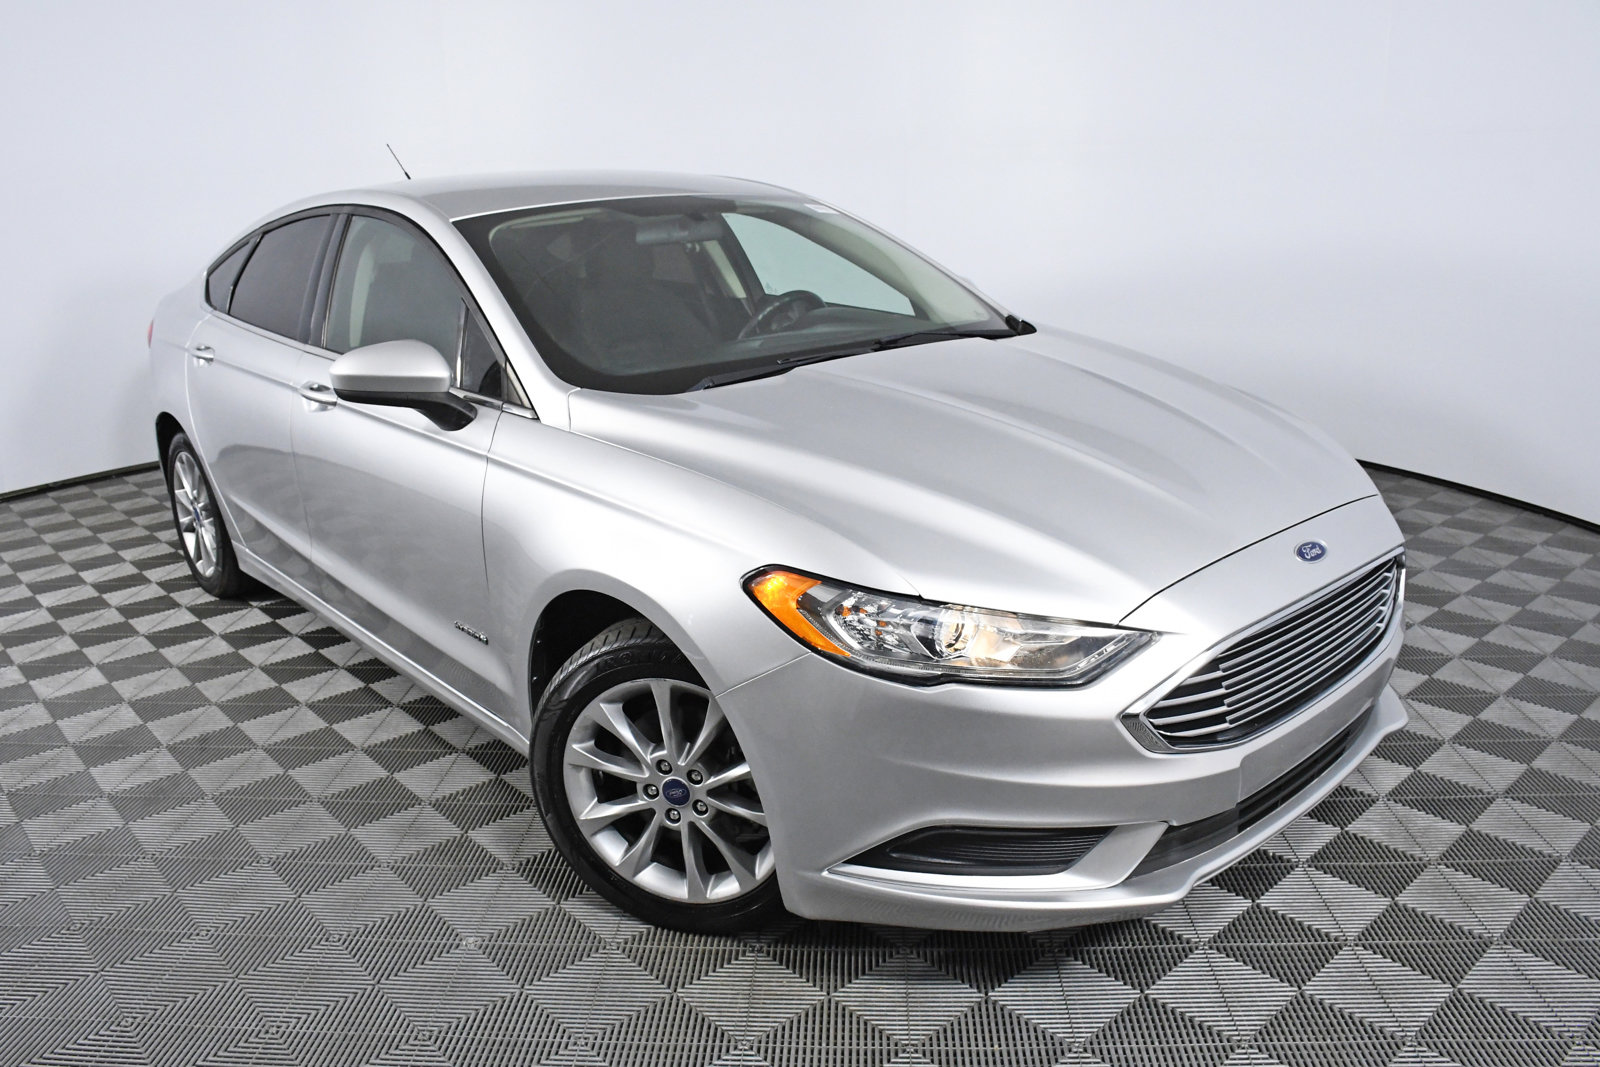 Pre-Owned 2017 Ford Fusion Hybrid SE 4dr Car in Palmetto Bay #R232484 |  HGreg Nissan Kendall